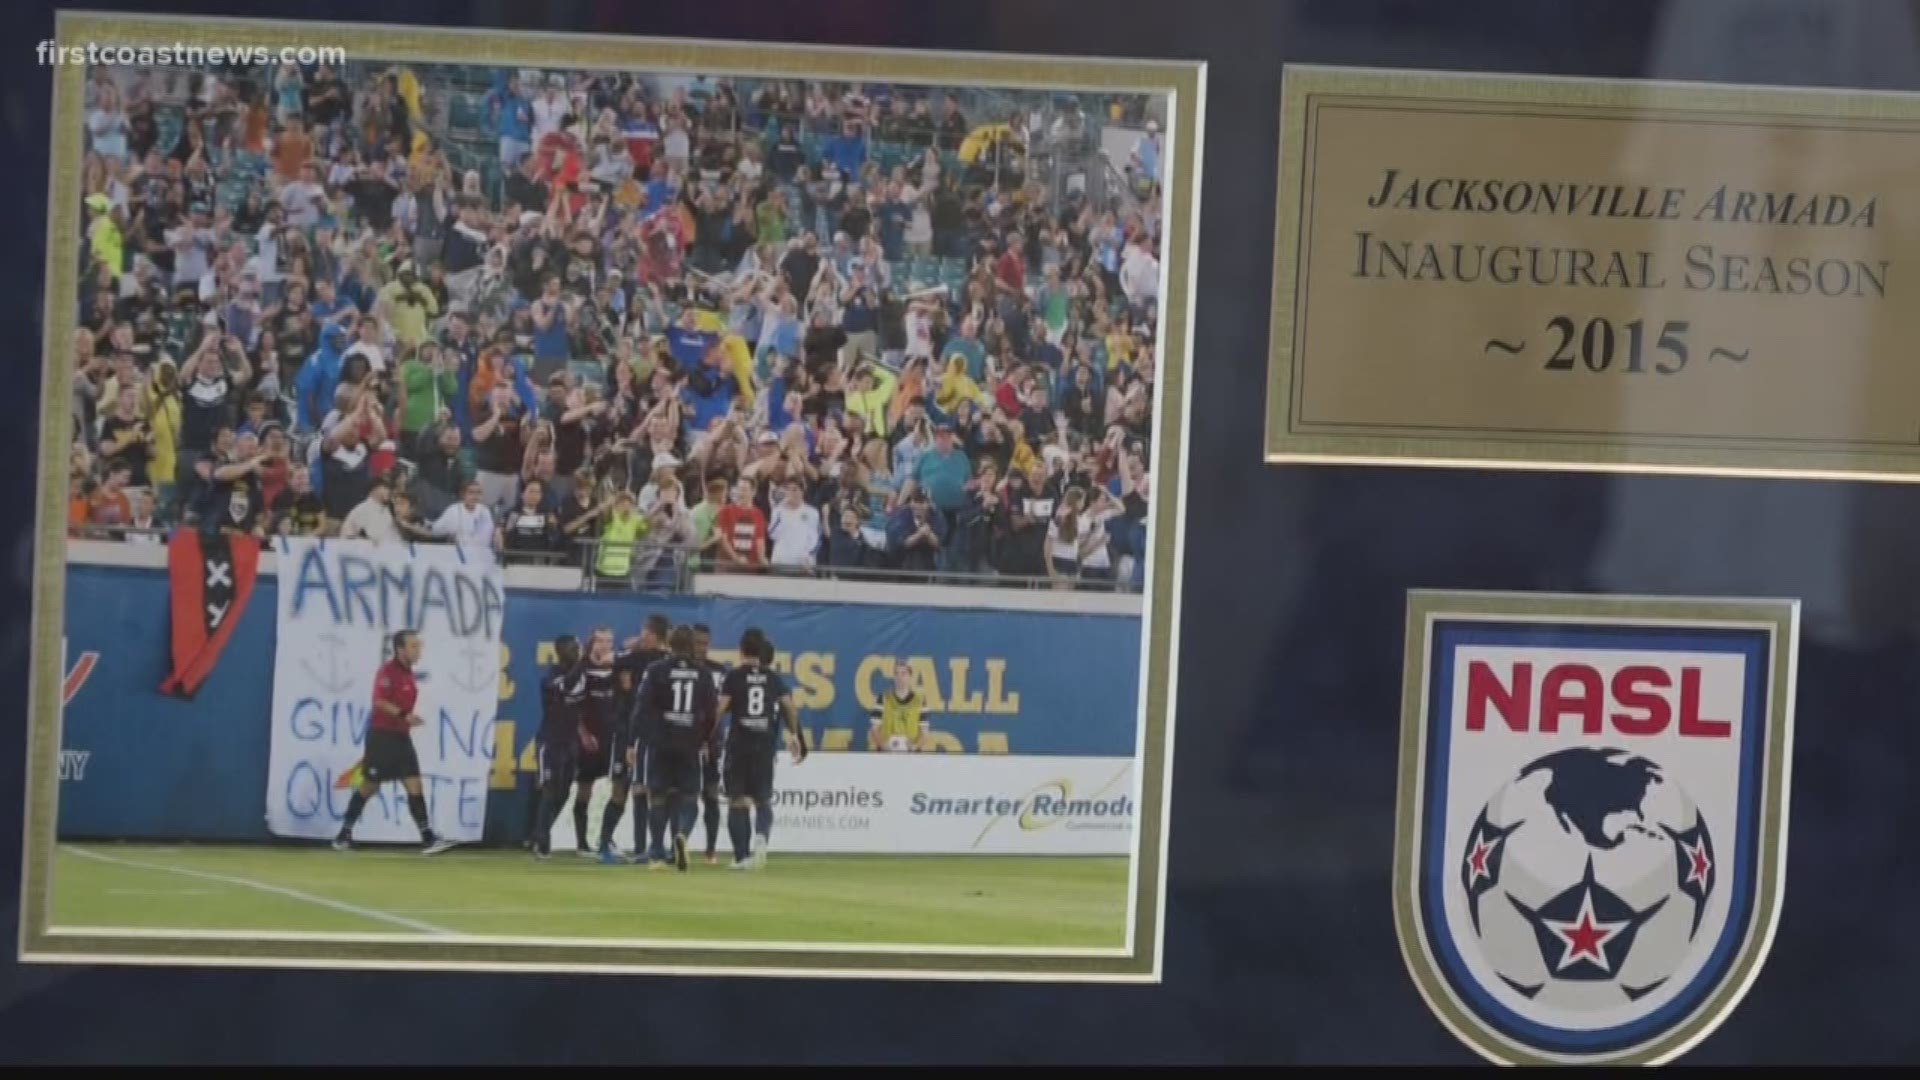 For the first time ever, the Jacksonville Armada are making a run for the championship. Excited is an understatement to describe how longtime fans are feeling.